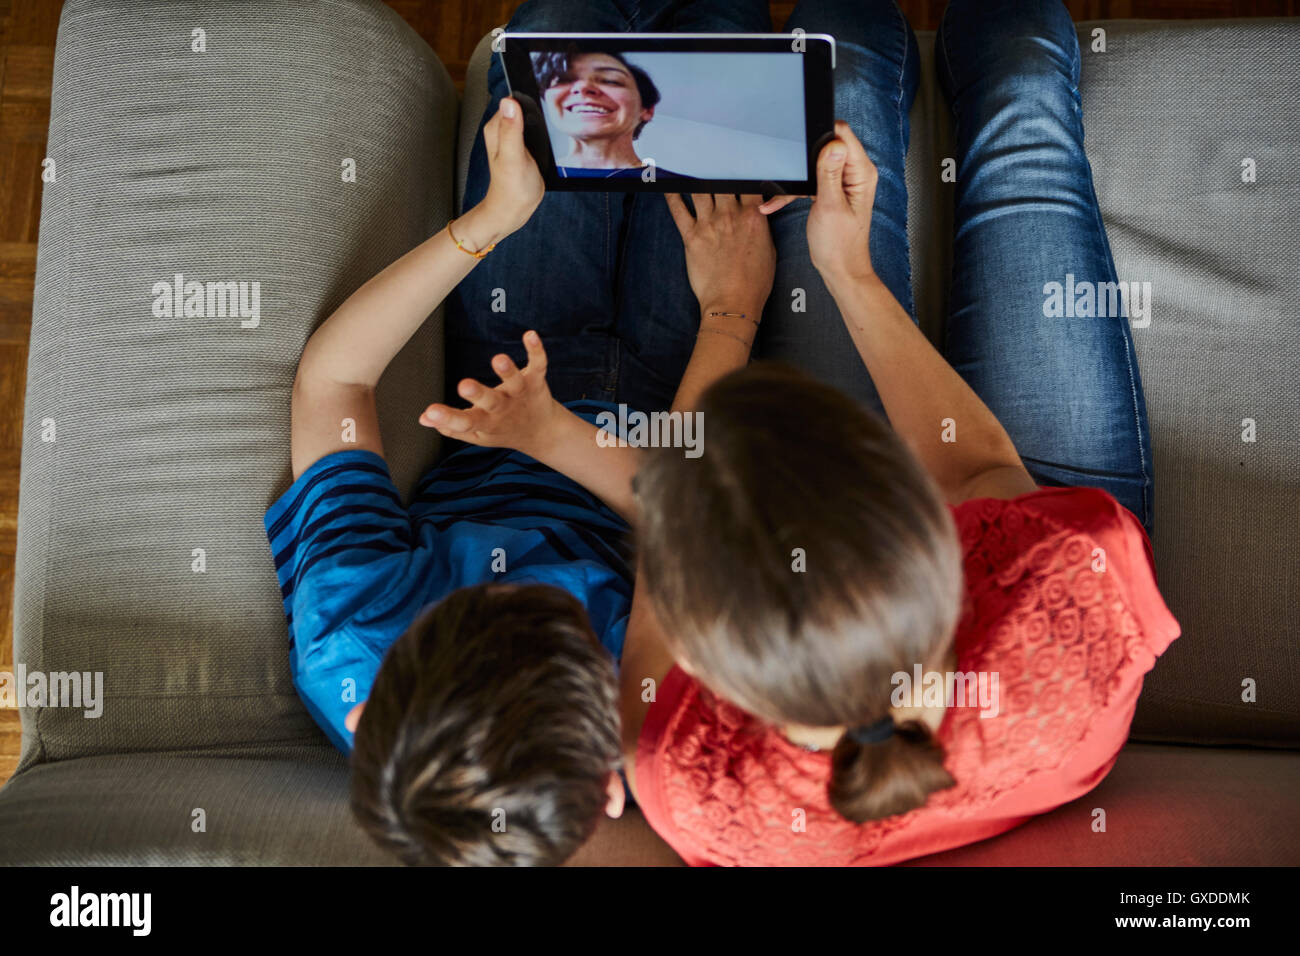 Overhead view of mother and son on sofa using digital tablet Stock Photo